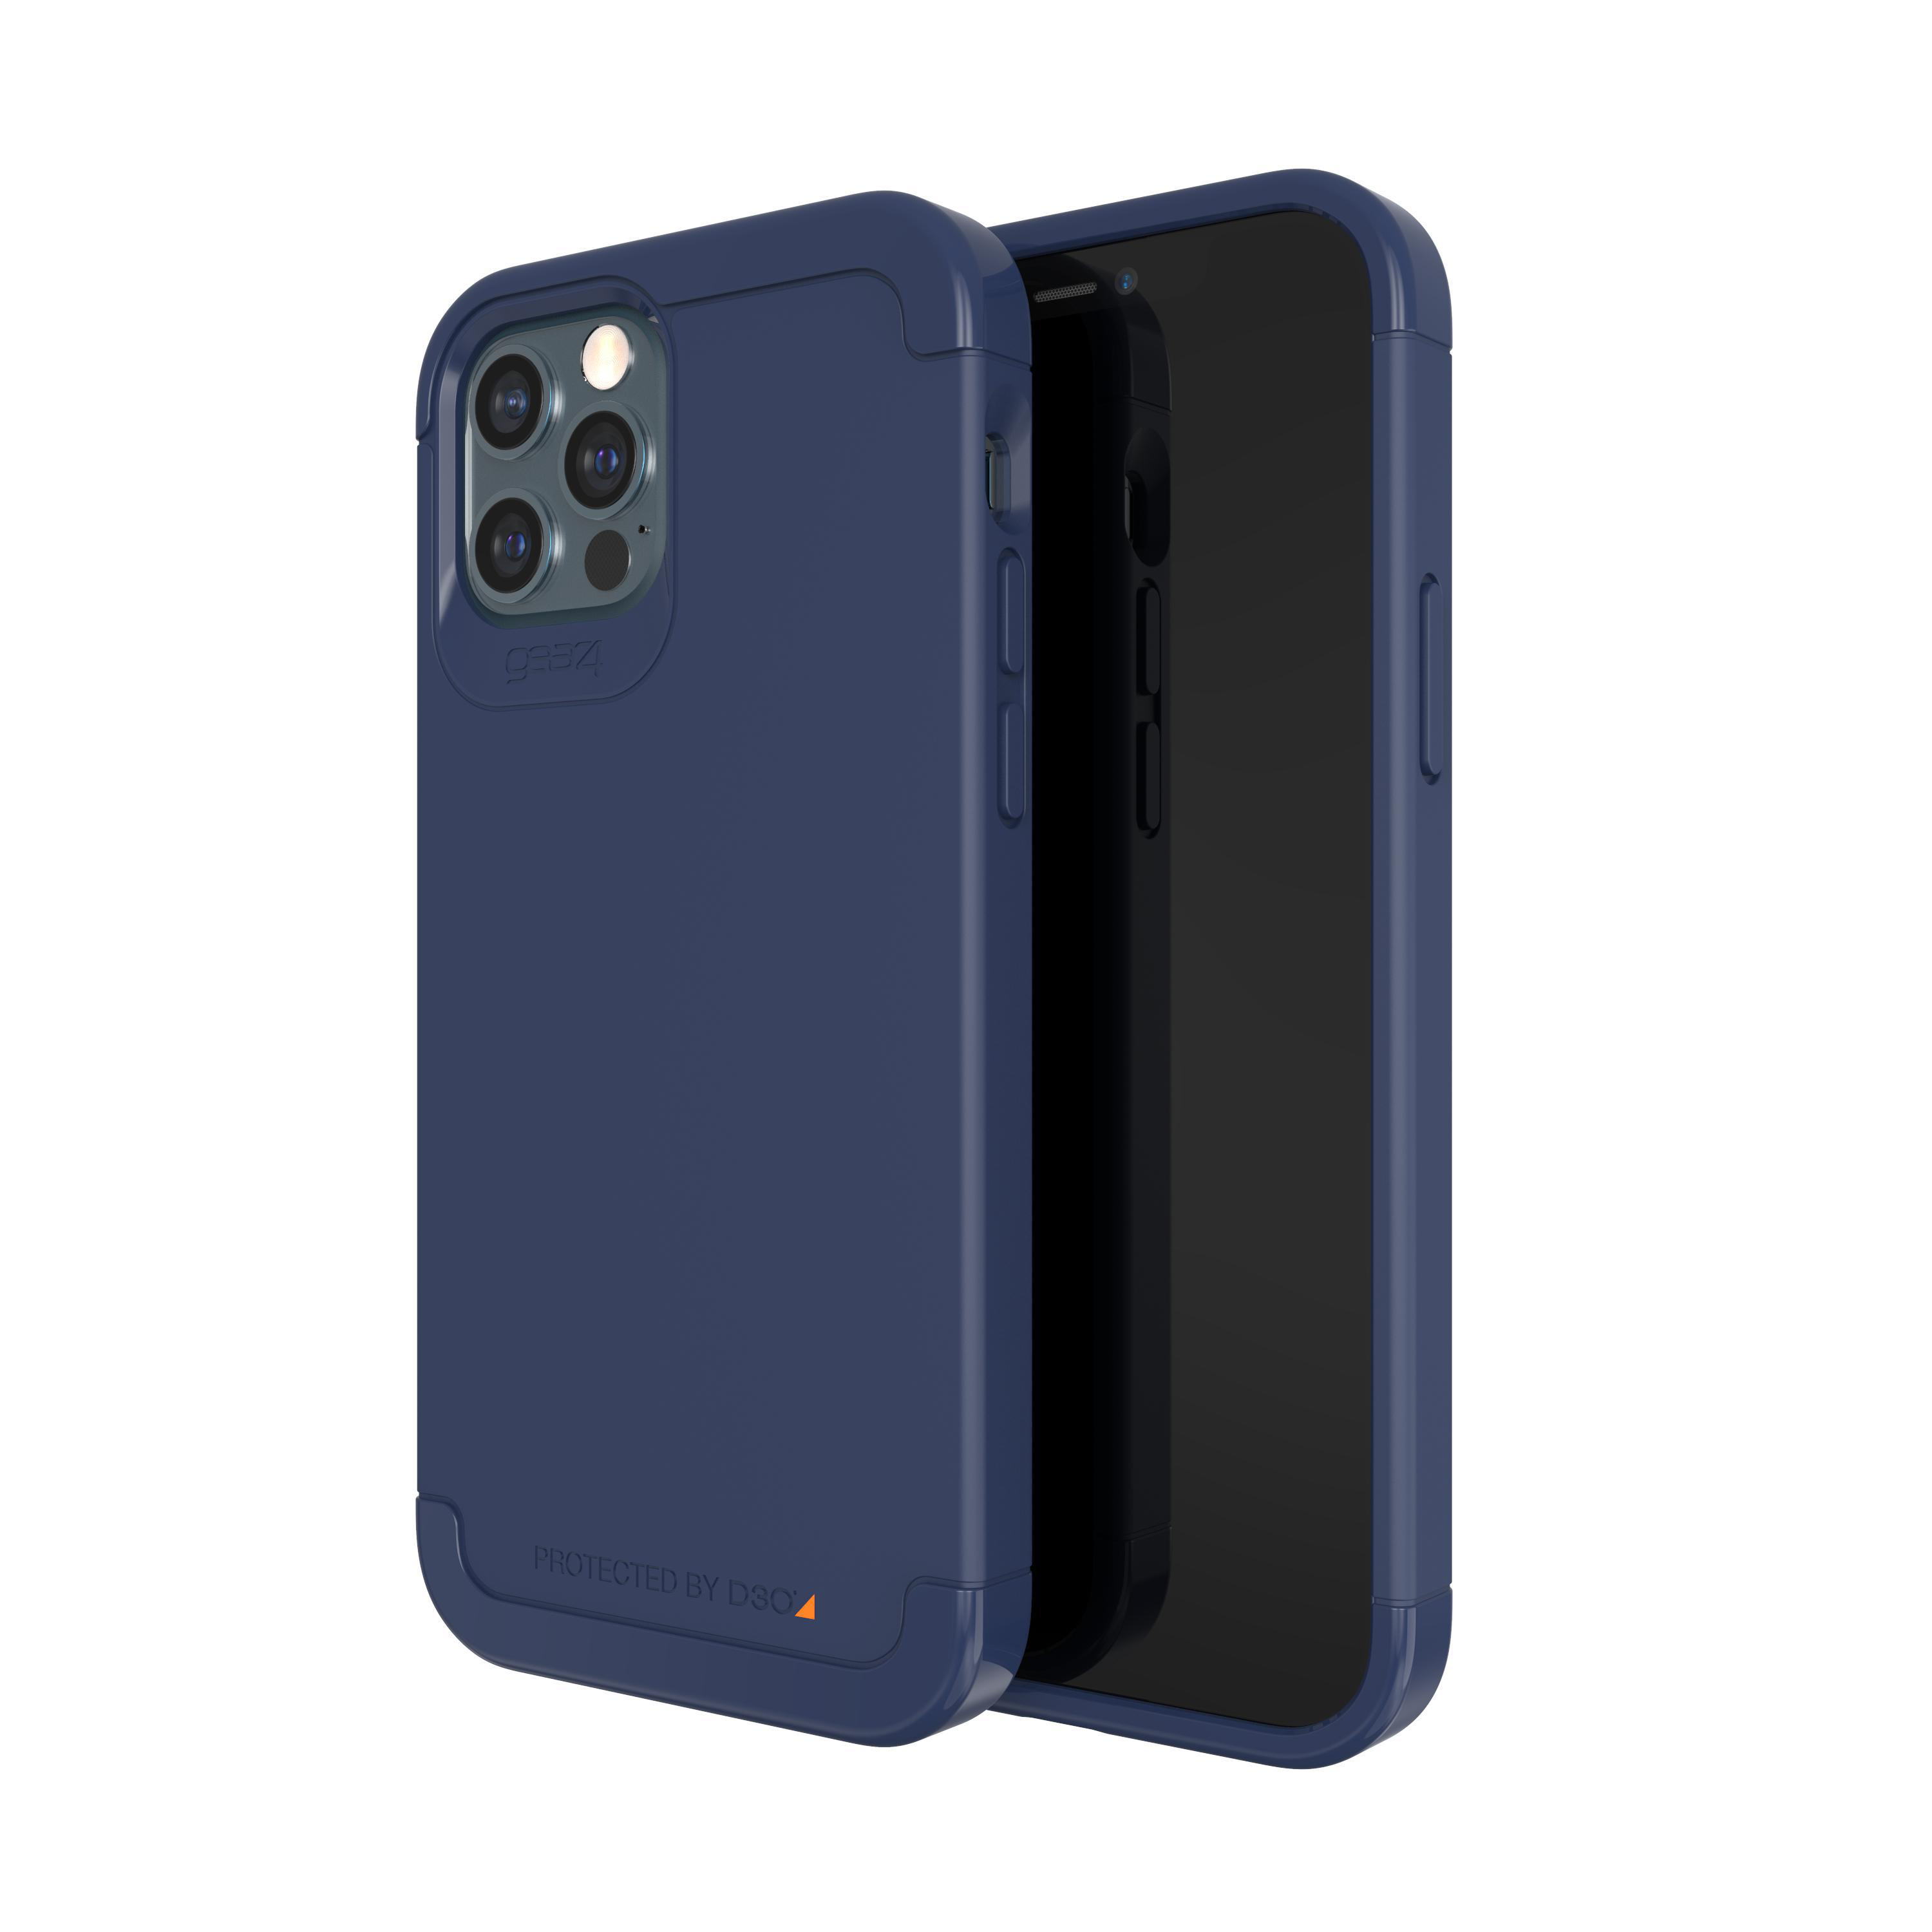 Backcover, Pro, blue Wembley Apple, GEAR4 Palette, Navy 12/12 iPhone D3O